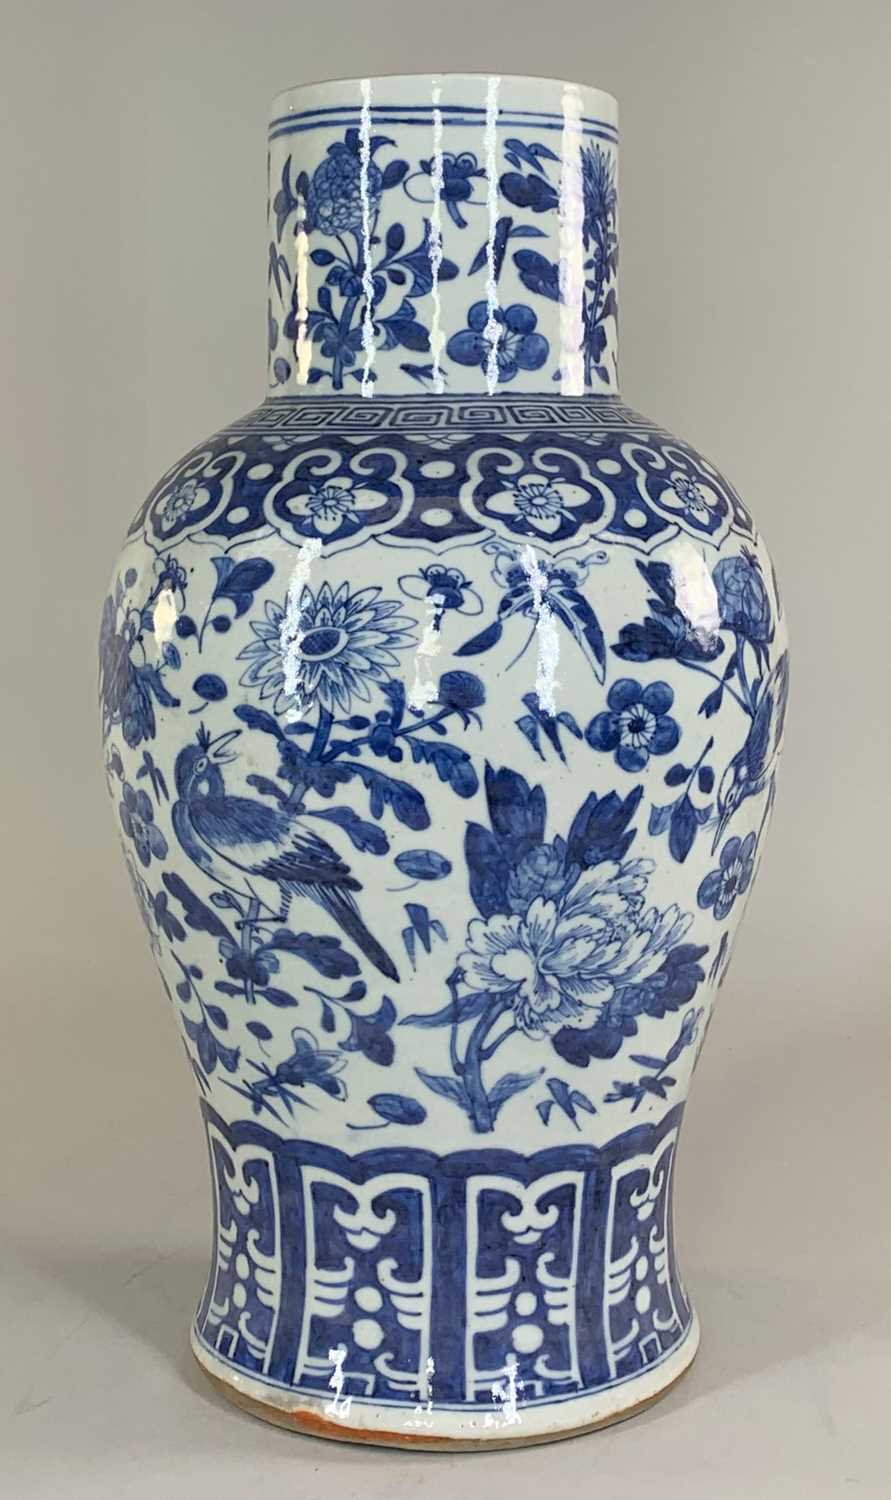 CHINESE BLUE & WHITE BALUSTER VASE, late Qing Dynasty, painted with flowers, insects and birds, - Image 3 of 12